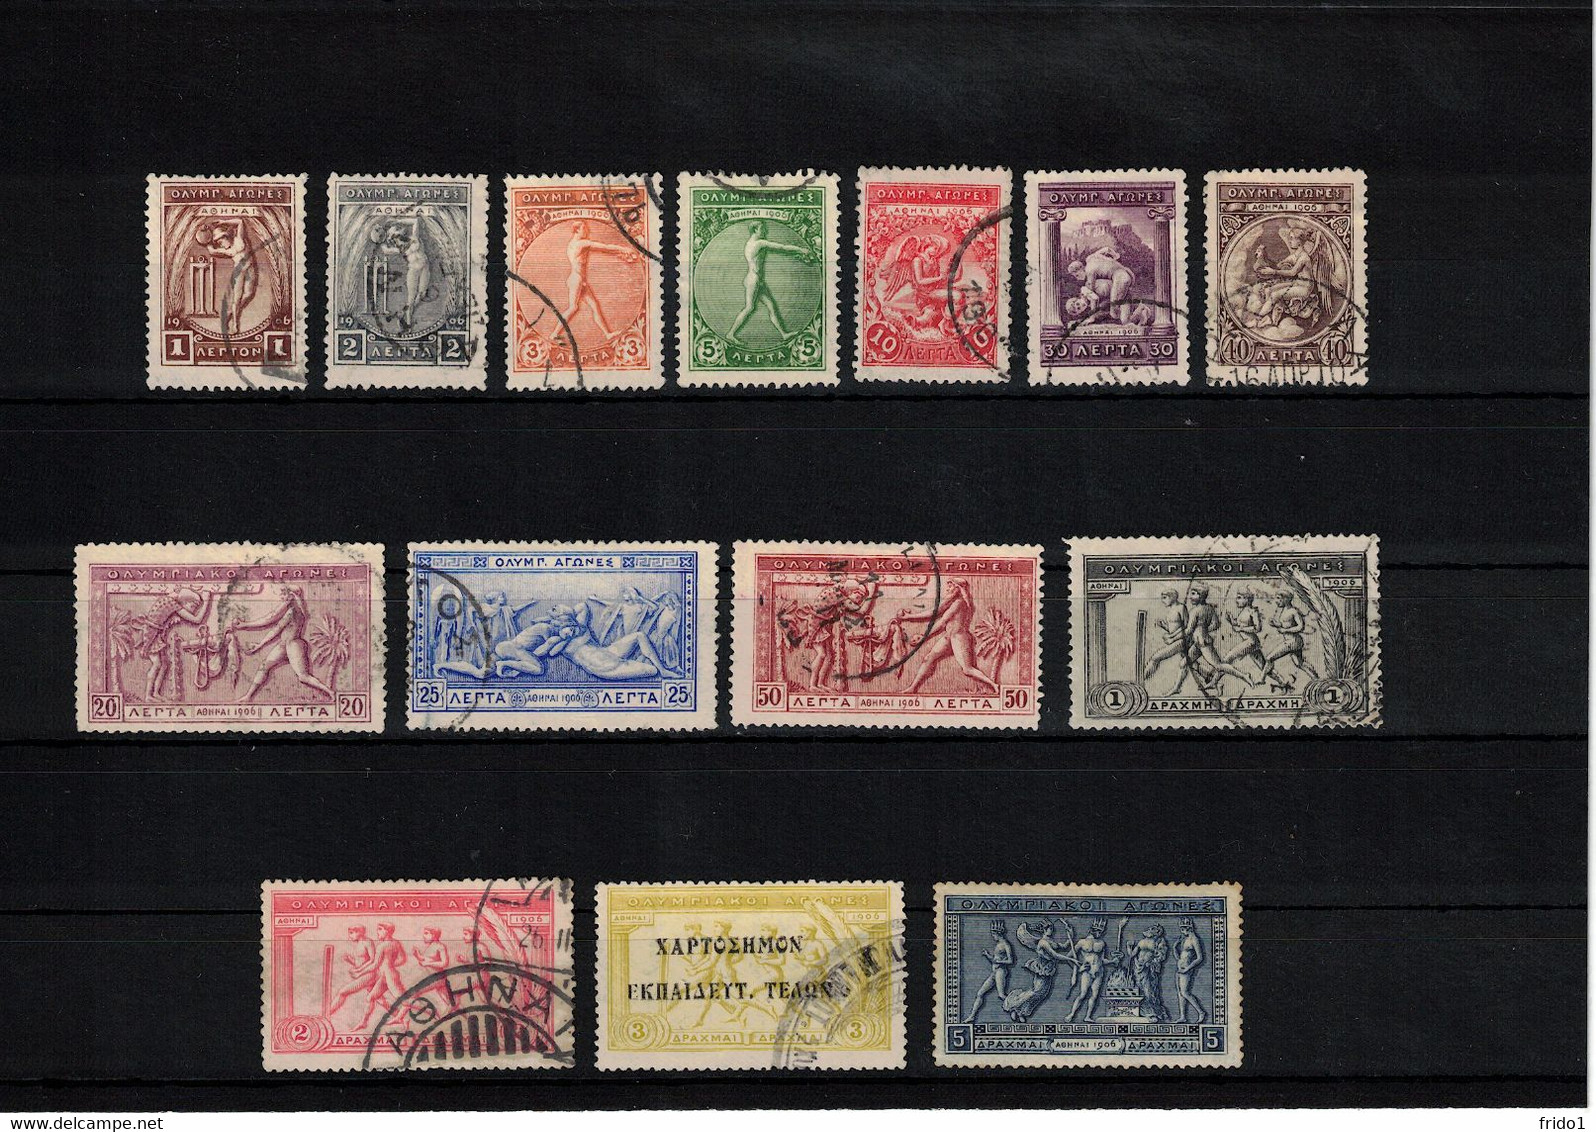 Greece / Griechenland 1906 Olympic Games  Fine Used + 3 Dr. Overprinted + 5 Dr MH  Michel 144 - 157 - Gebruikt